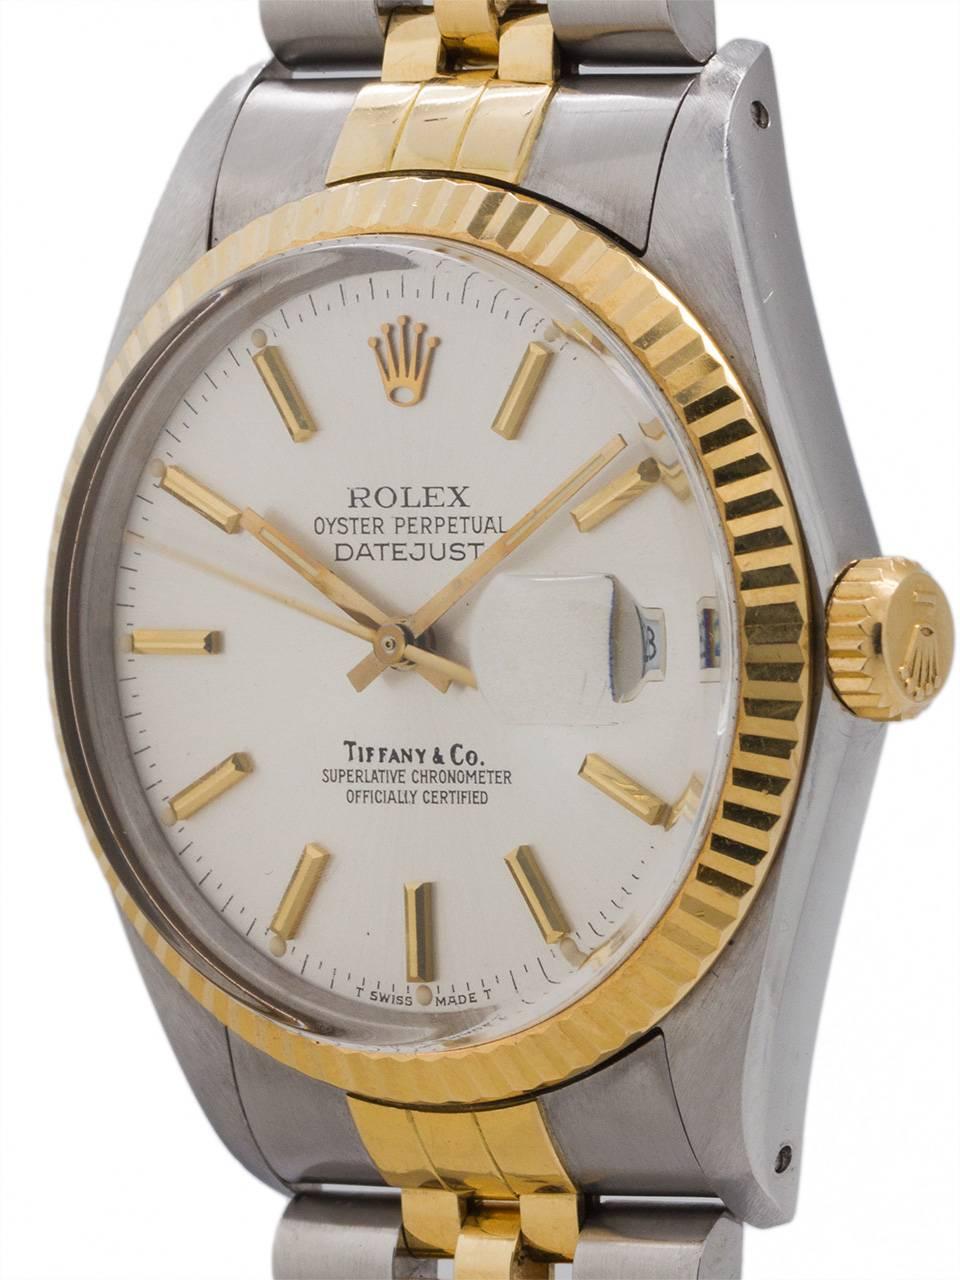 An interesting personalized Rolex Datejust ref 16013 SS/18K YG retailed by Tiffany & Co engraved on the caseback “George from Barbara 10/15/89.” Featuring a full size man’s 36mm diameter case with 18K YG fluted bezel, acrylic crystal, and